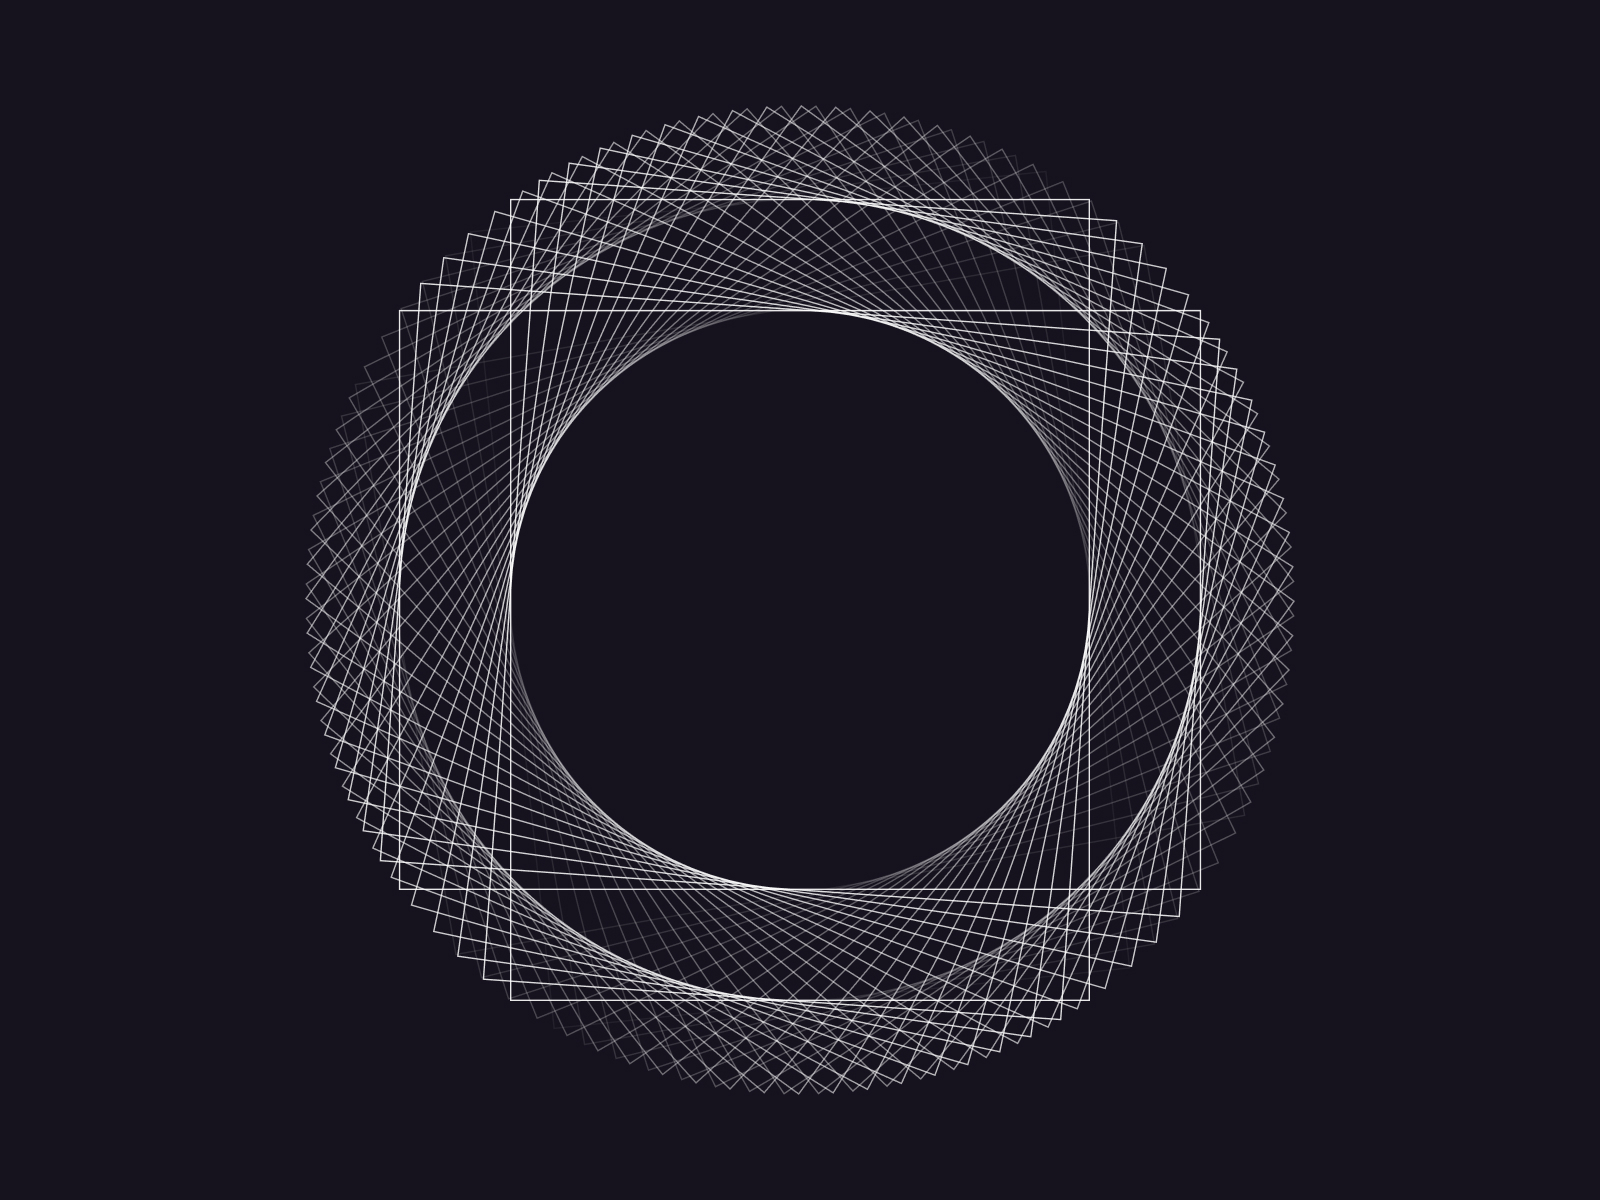 Perfect circle of rectangles by Sergio Ortega on Dribbble